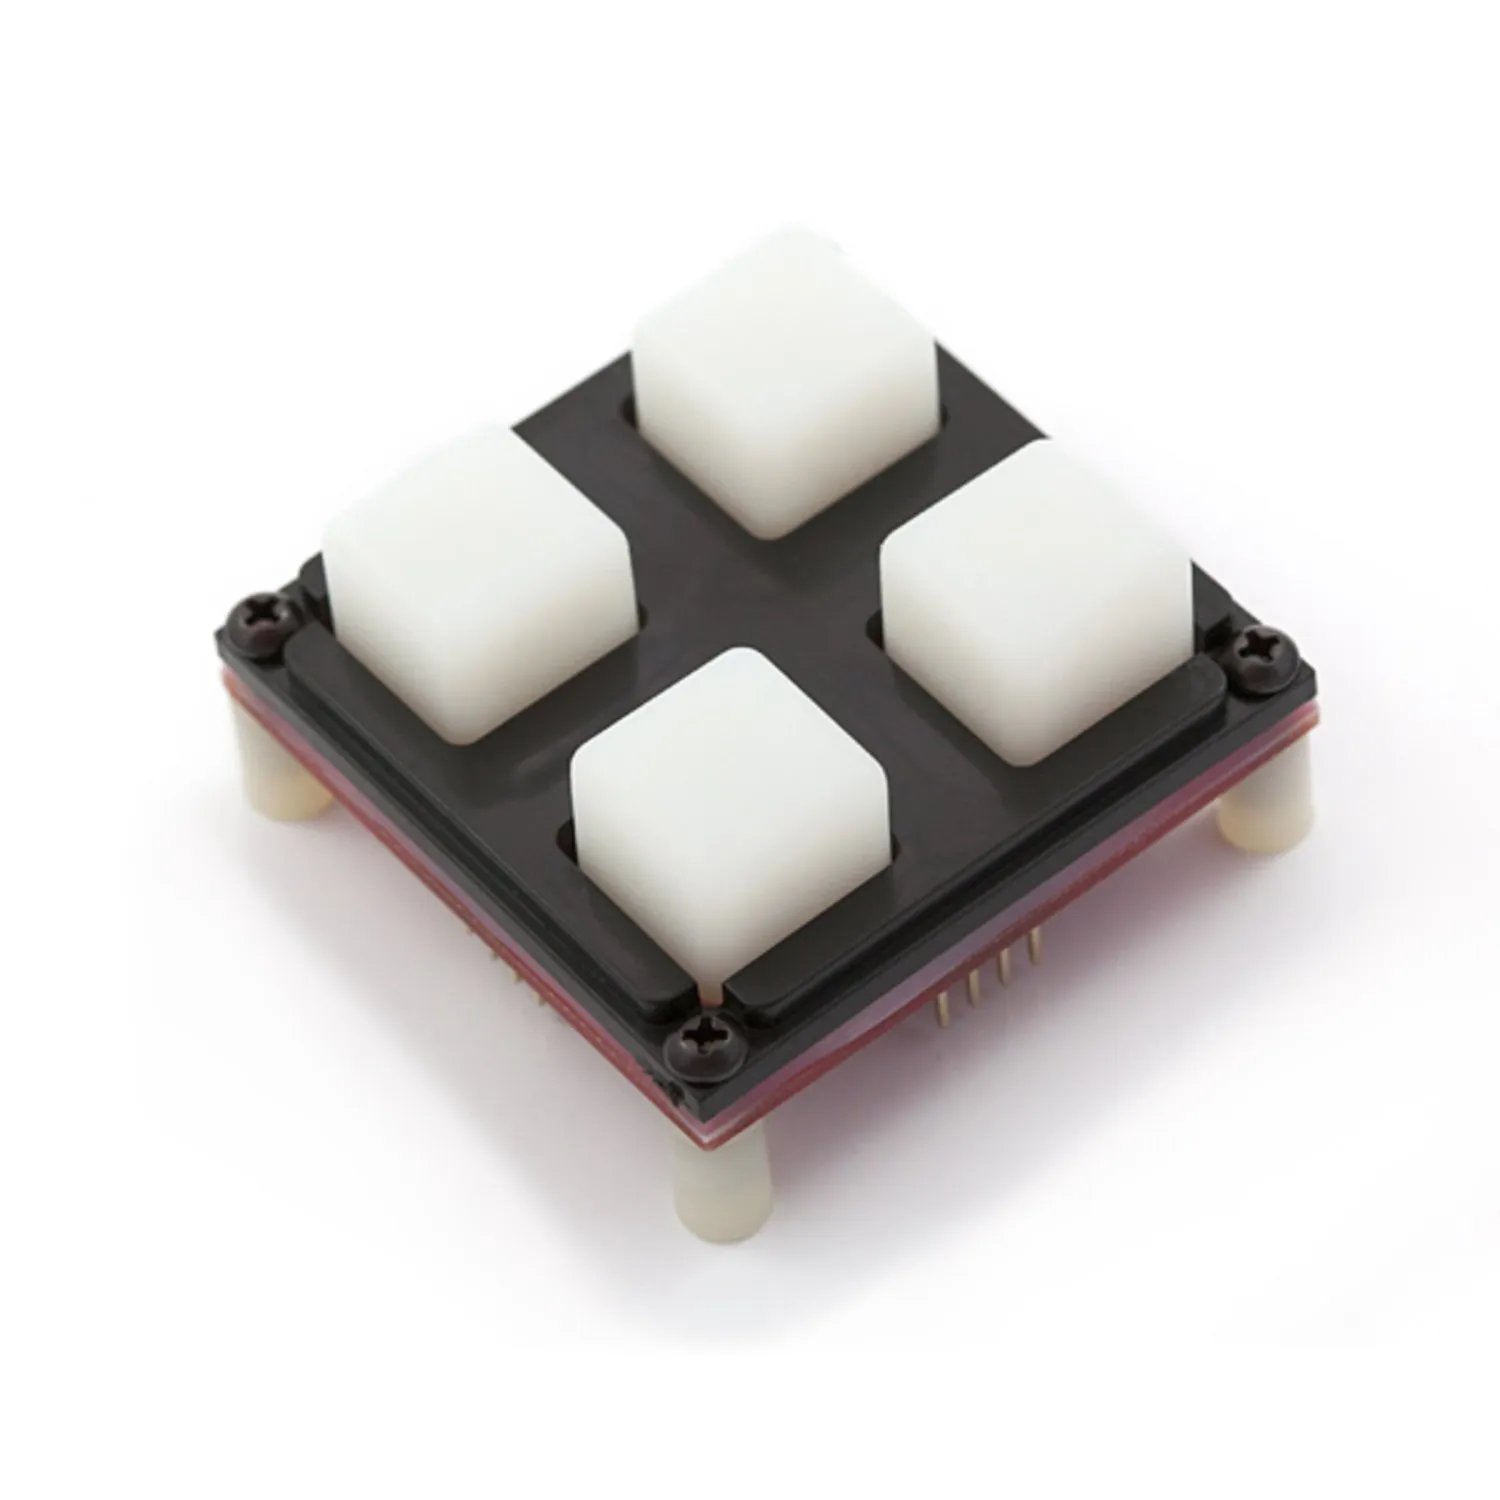 Photo of Button Pad 2x2 - Breakout PCB